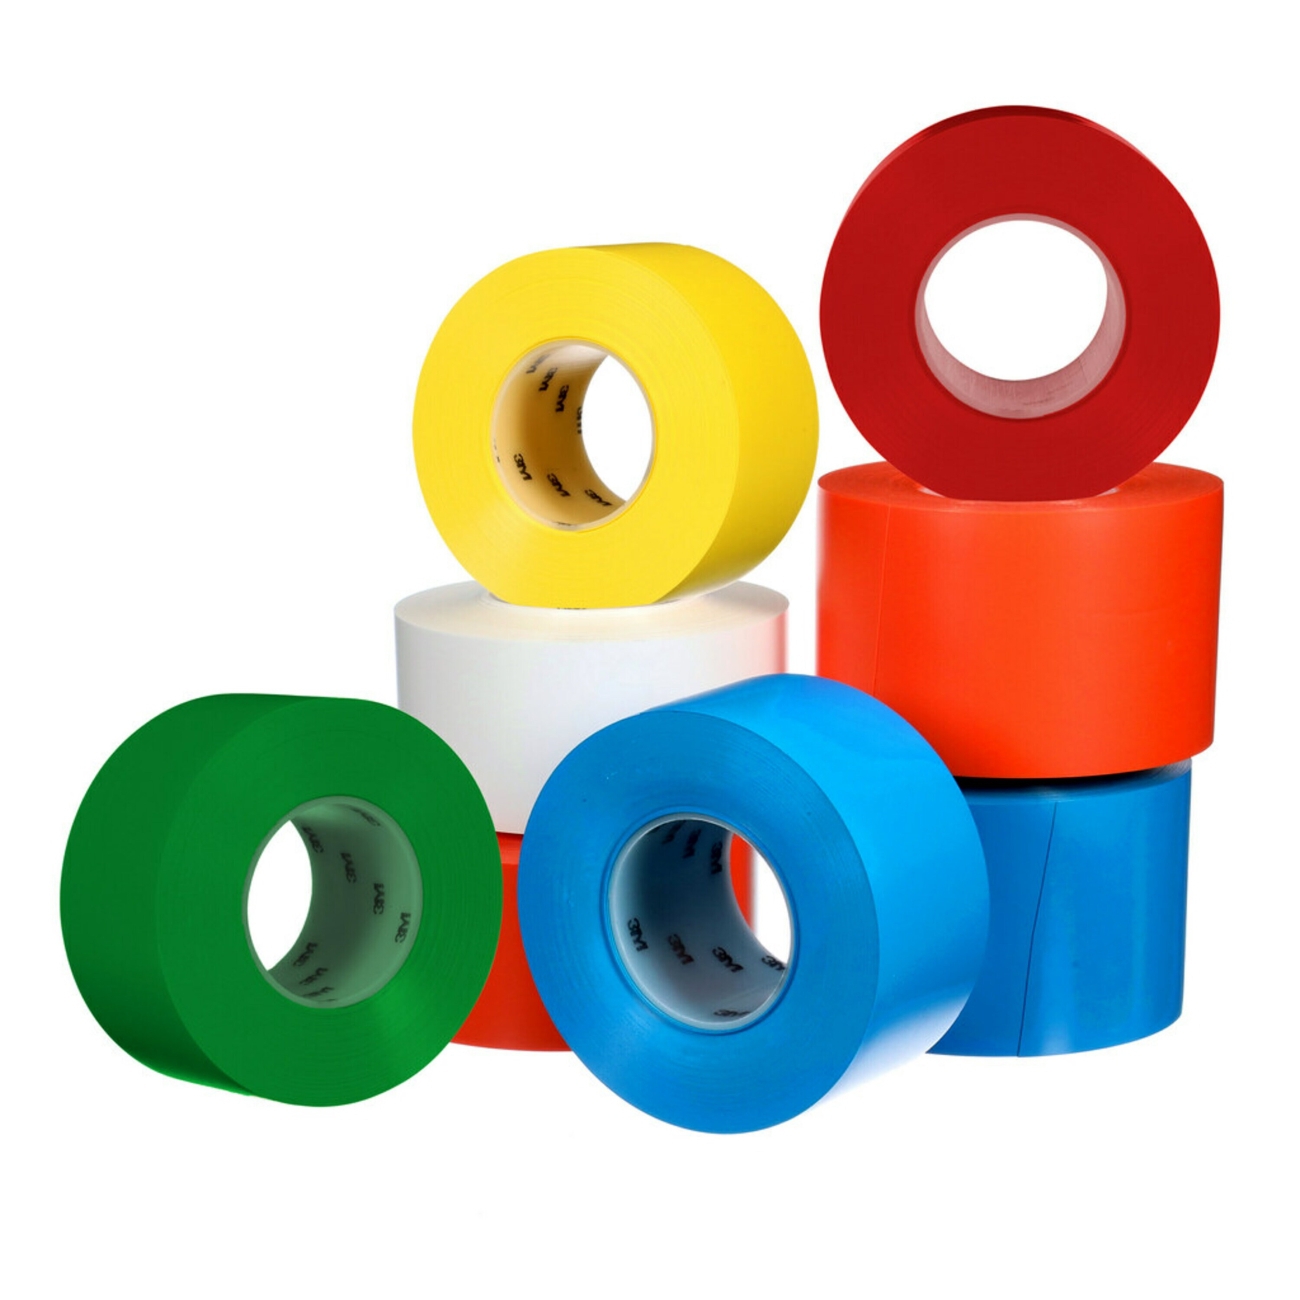 3M extra strong floor marking tape 971, yellow, 50.8mm x 32.9m, 0.43mm